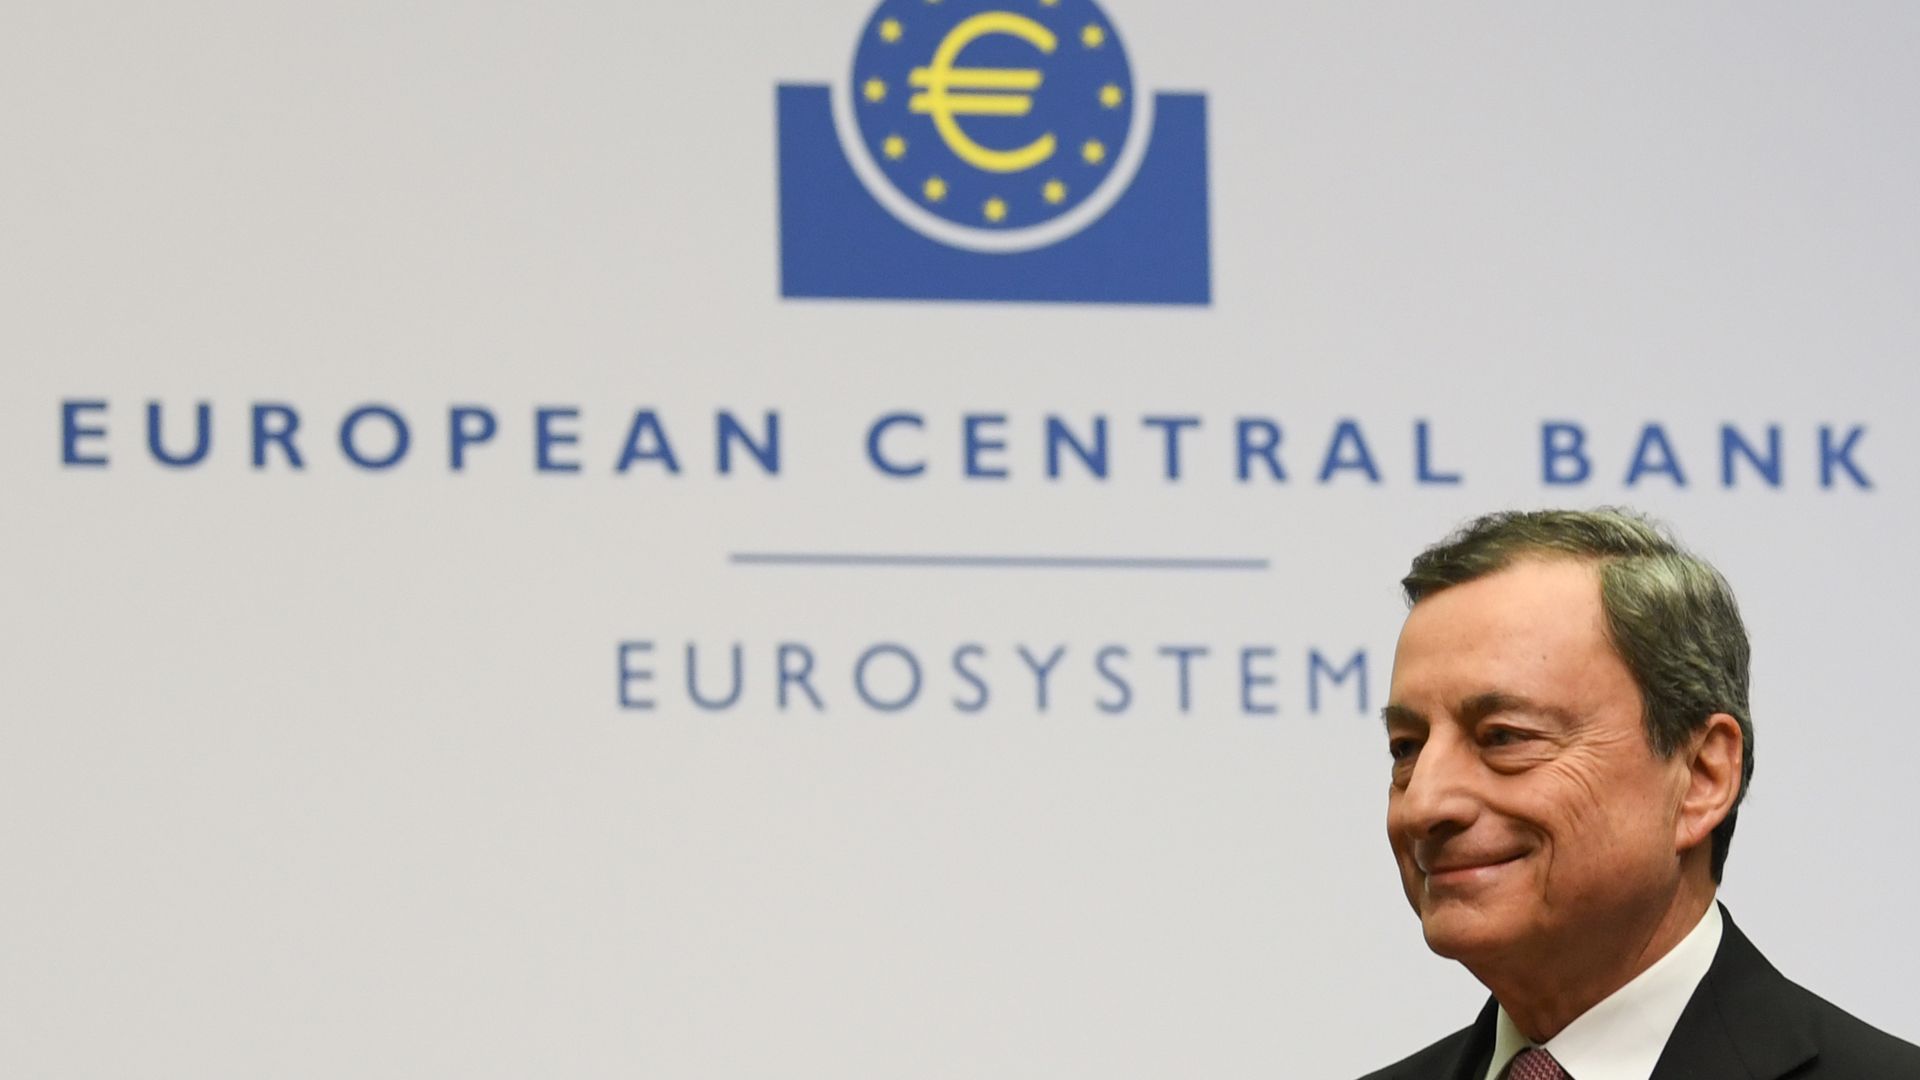 Mario Draghi, President of the European Central Bank (ECB) at a press conference at the ECB's headquarters